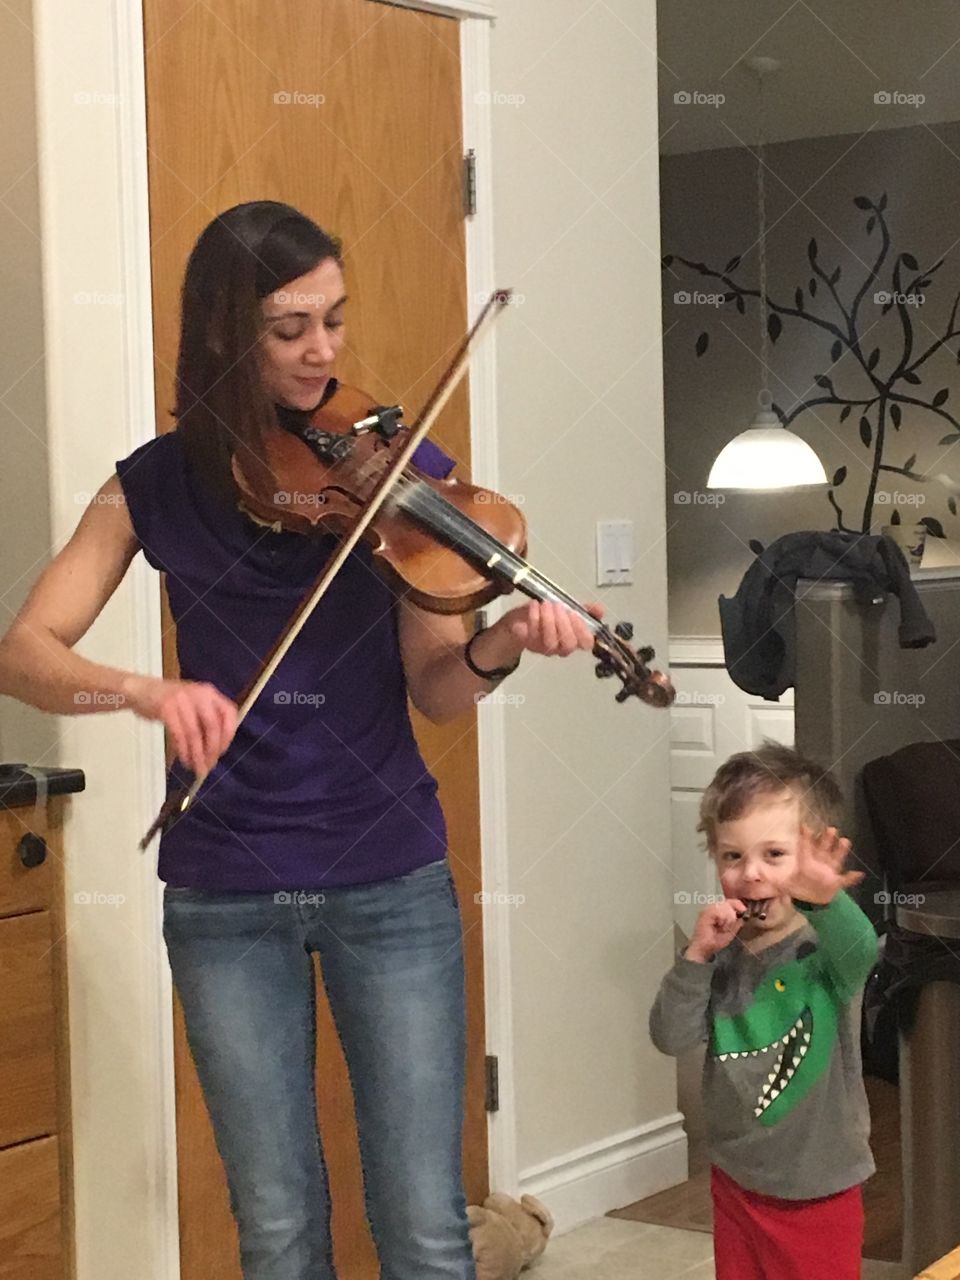 Fiddle player 